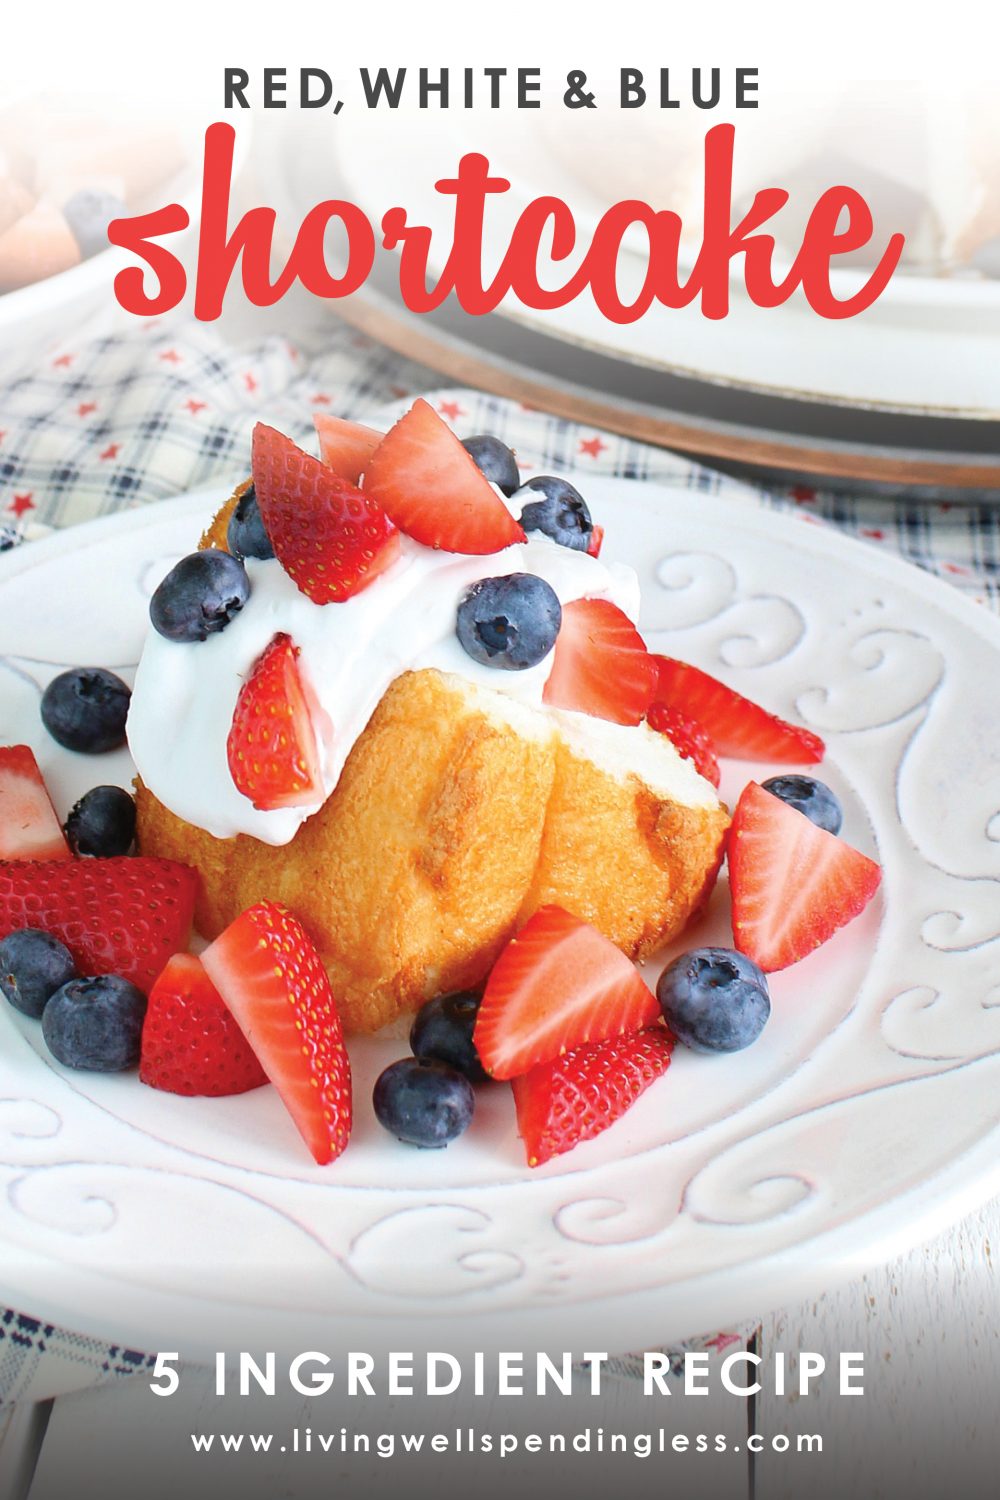 This red white and blue- strawberry, blueberry shortcake is the perfect festive 4th of July summer dessert. Perfect for your next Independence Day party! #summerdesserts #4thofjuly #strawberryshortcake 